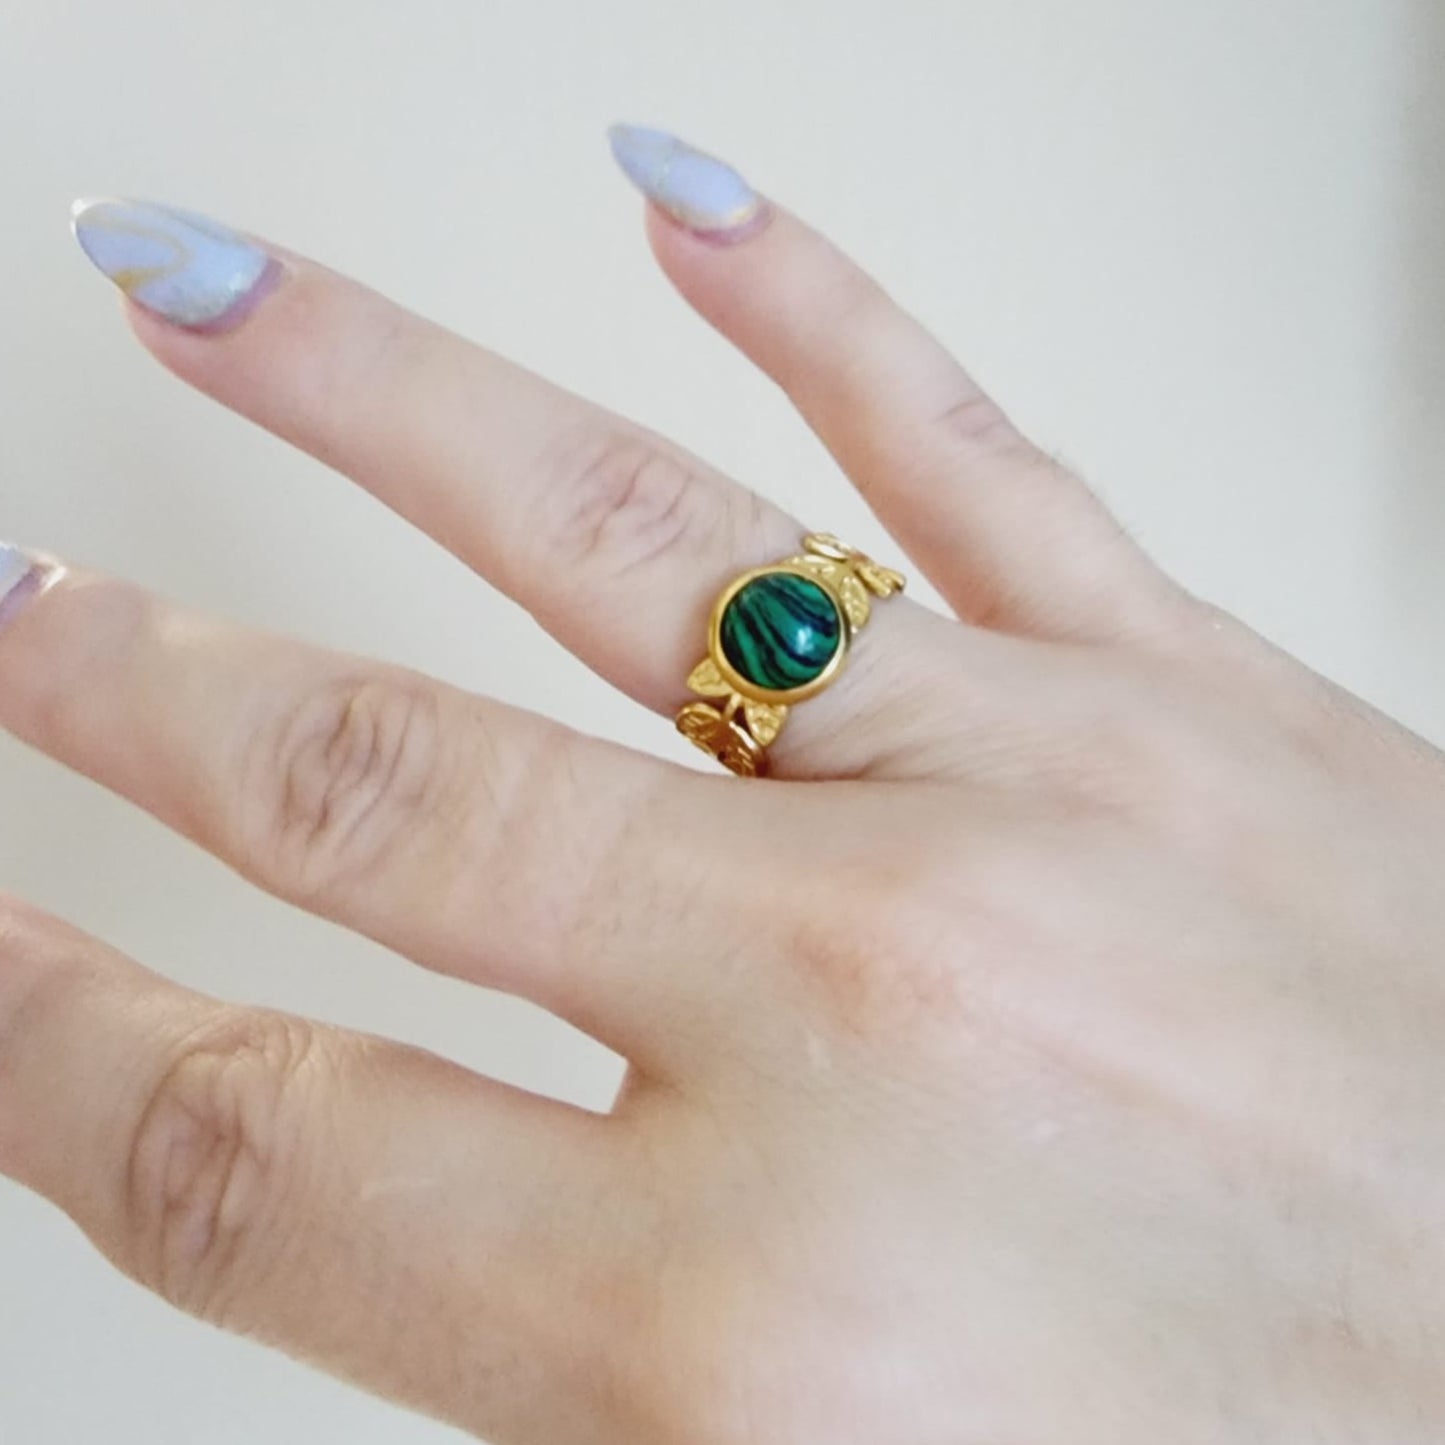 Emerald ring, Star ring, Adjustable bold ring, Adjustable Gold ring, Delicate and simple ring, chunky star ring, green gold ring, waterproof ring, hypoallergenic ring, untarnish ring, anti tarnish ring, anillo de estrellas, Water Resistant Jewelry, green Stone ring, green leaves adjustable ring